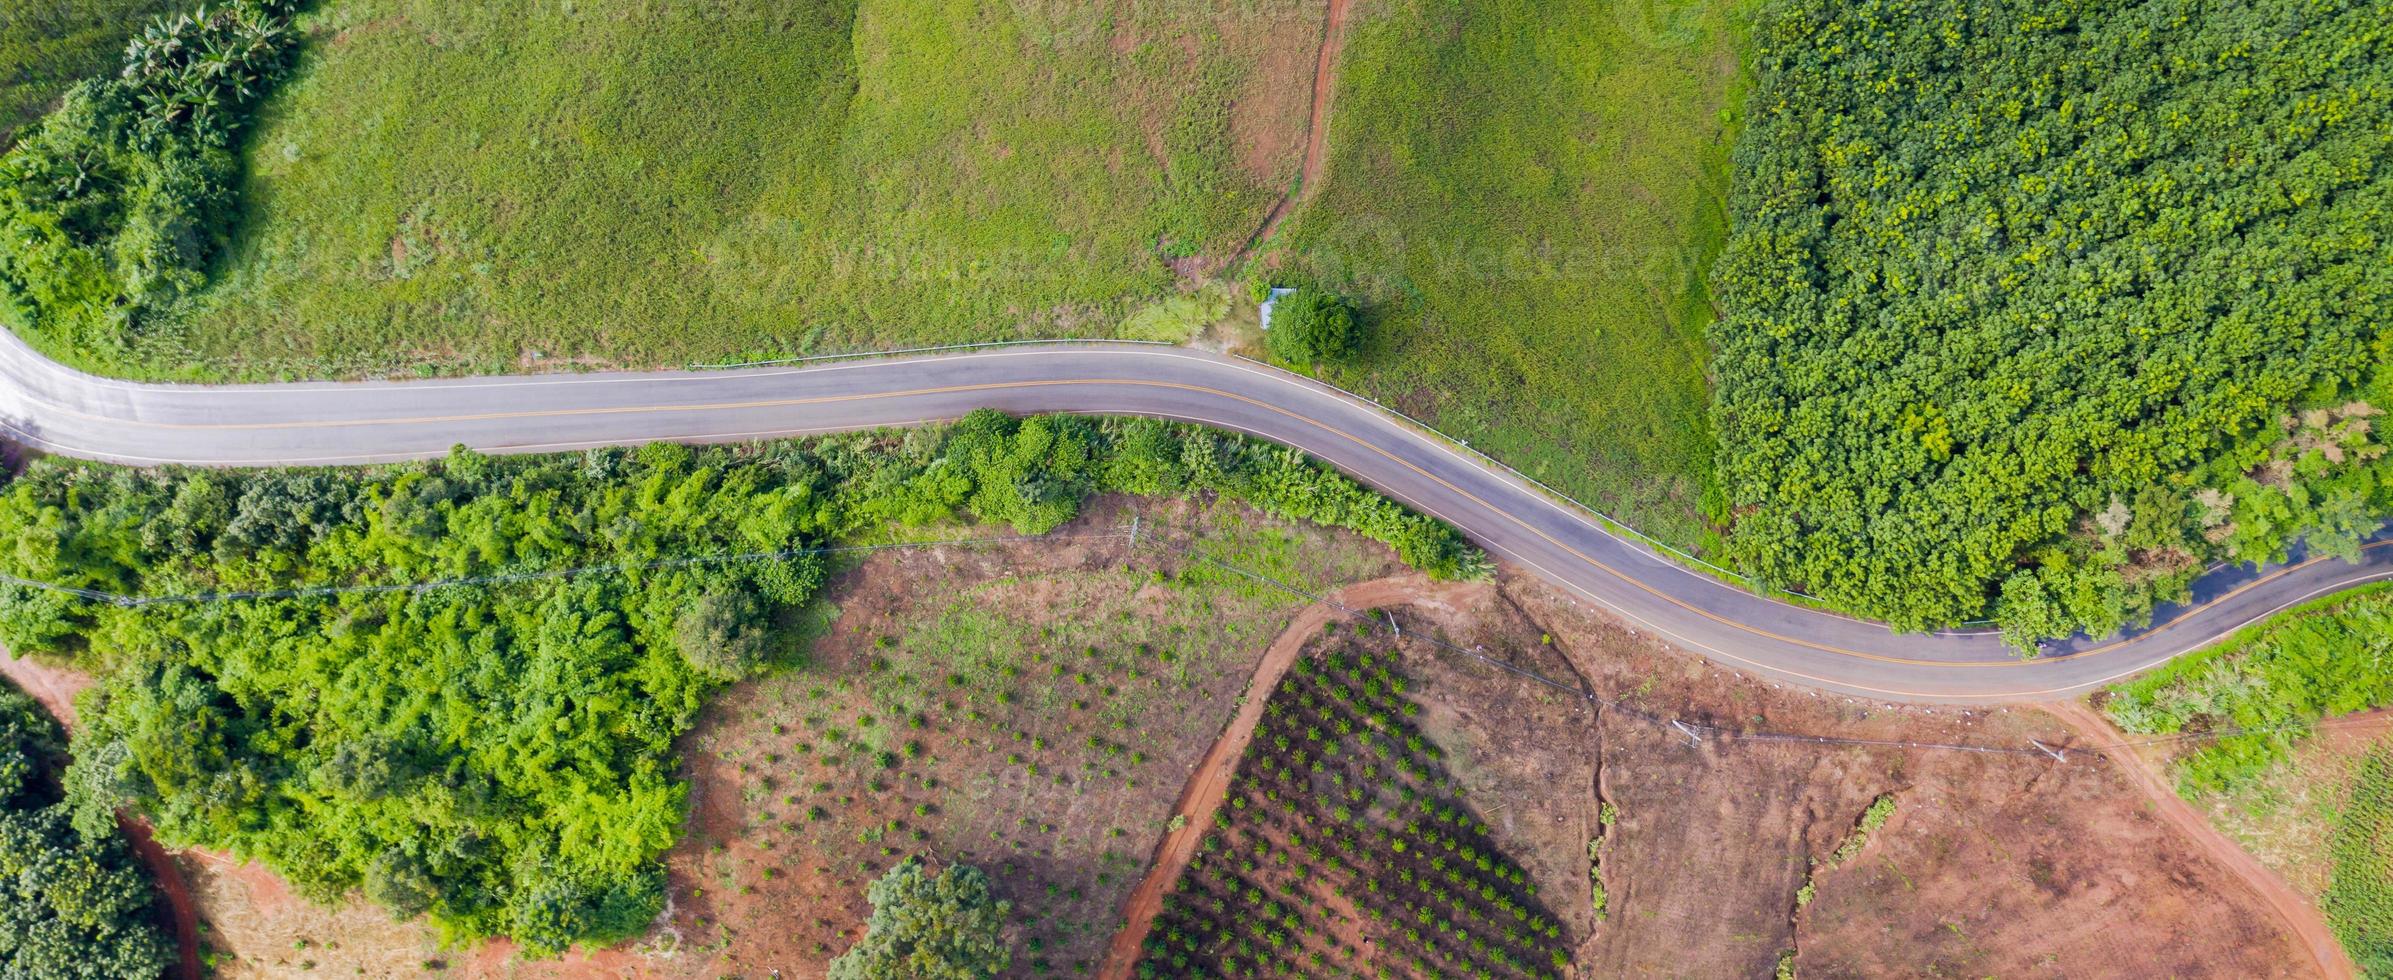 Aerial view of Rural road in countryside area, view from drone photo